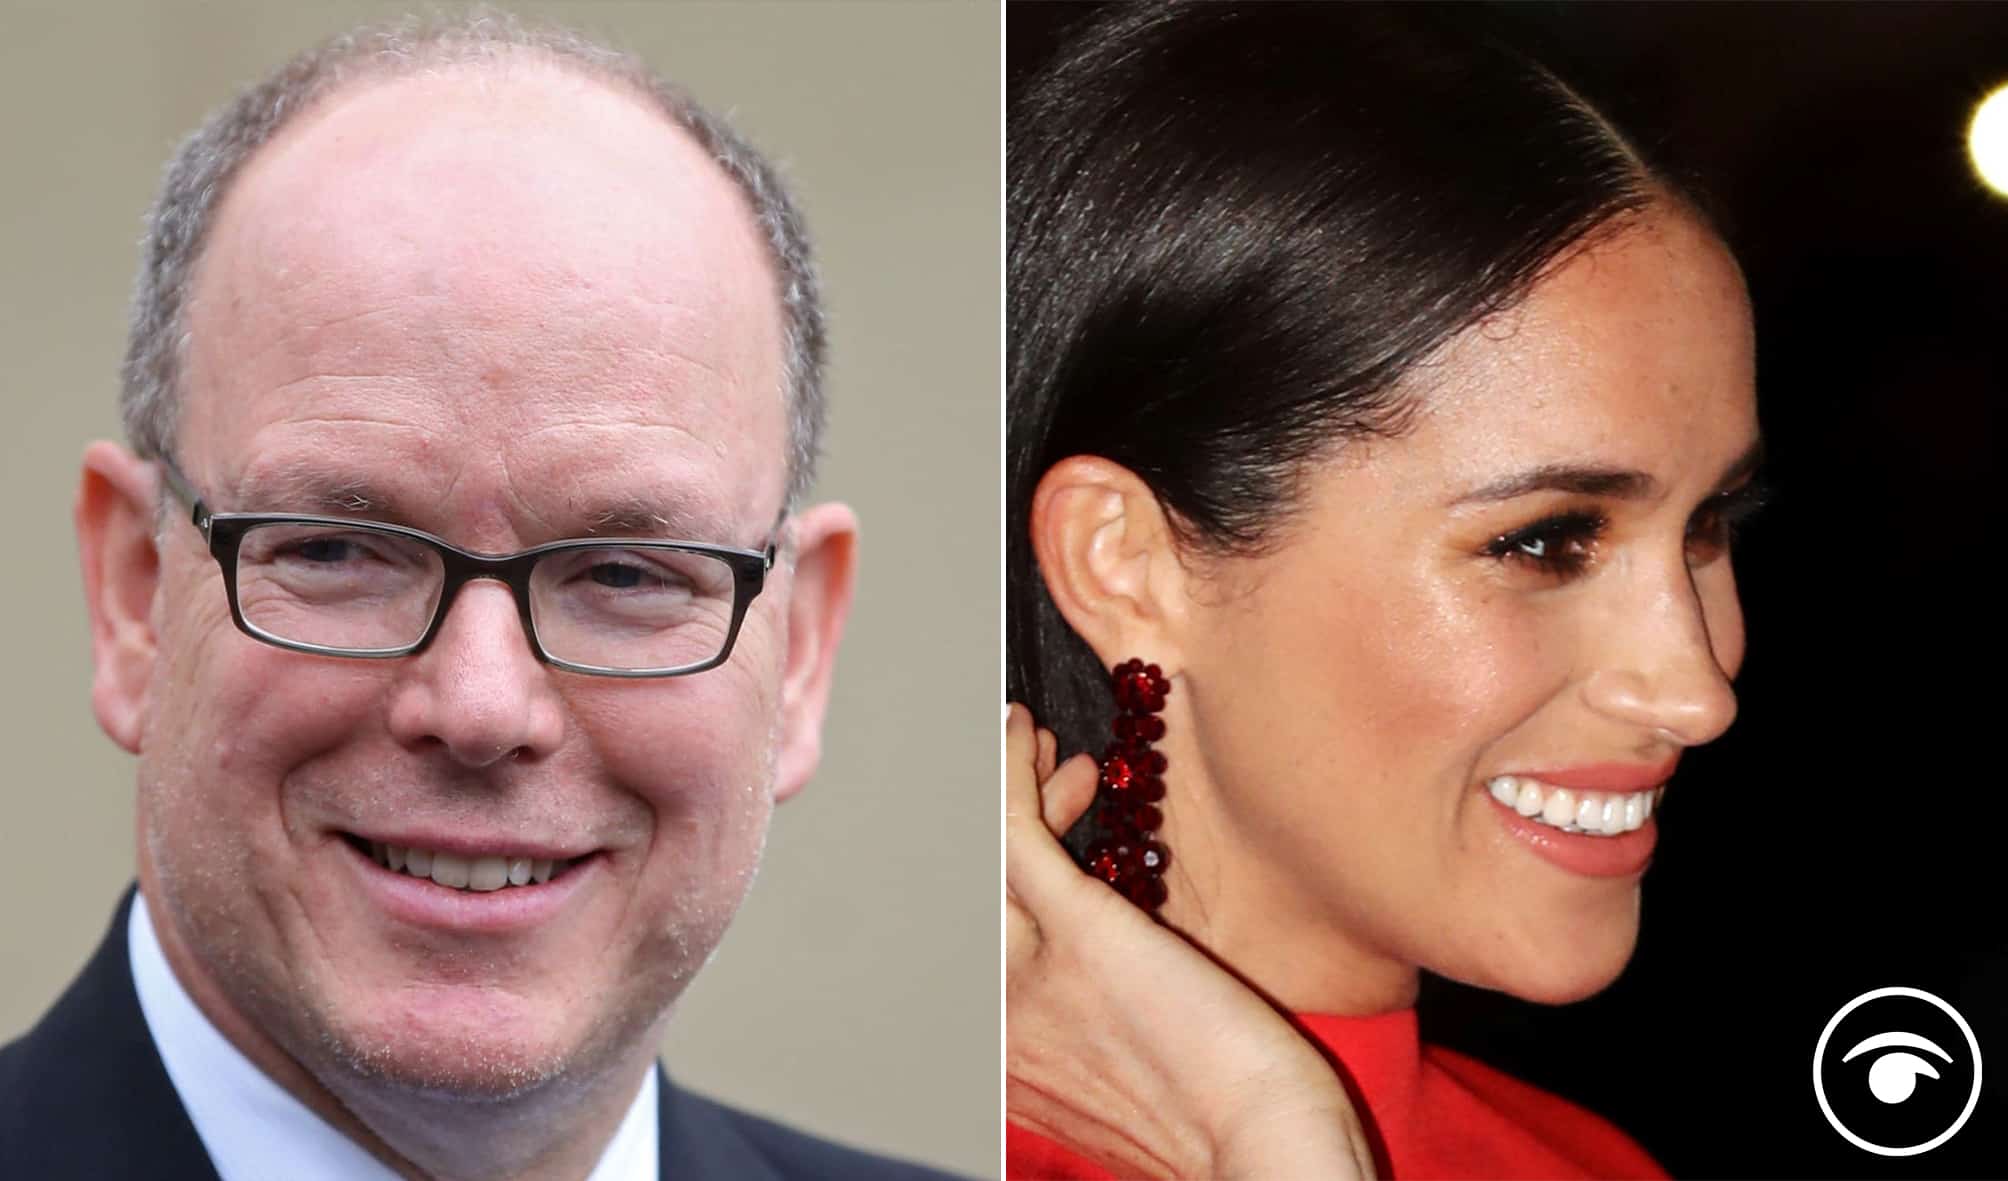 Prince dealing with third love child claims slams Harry and Meghan’s ‘inappropriate’ interview